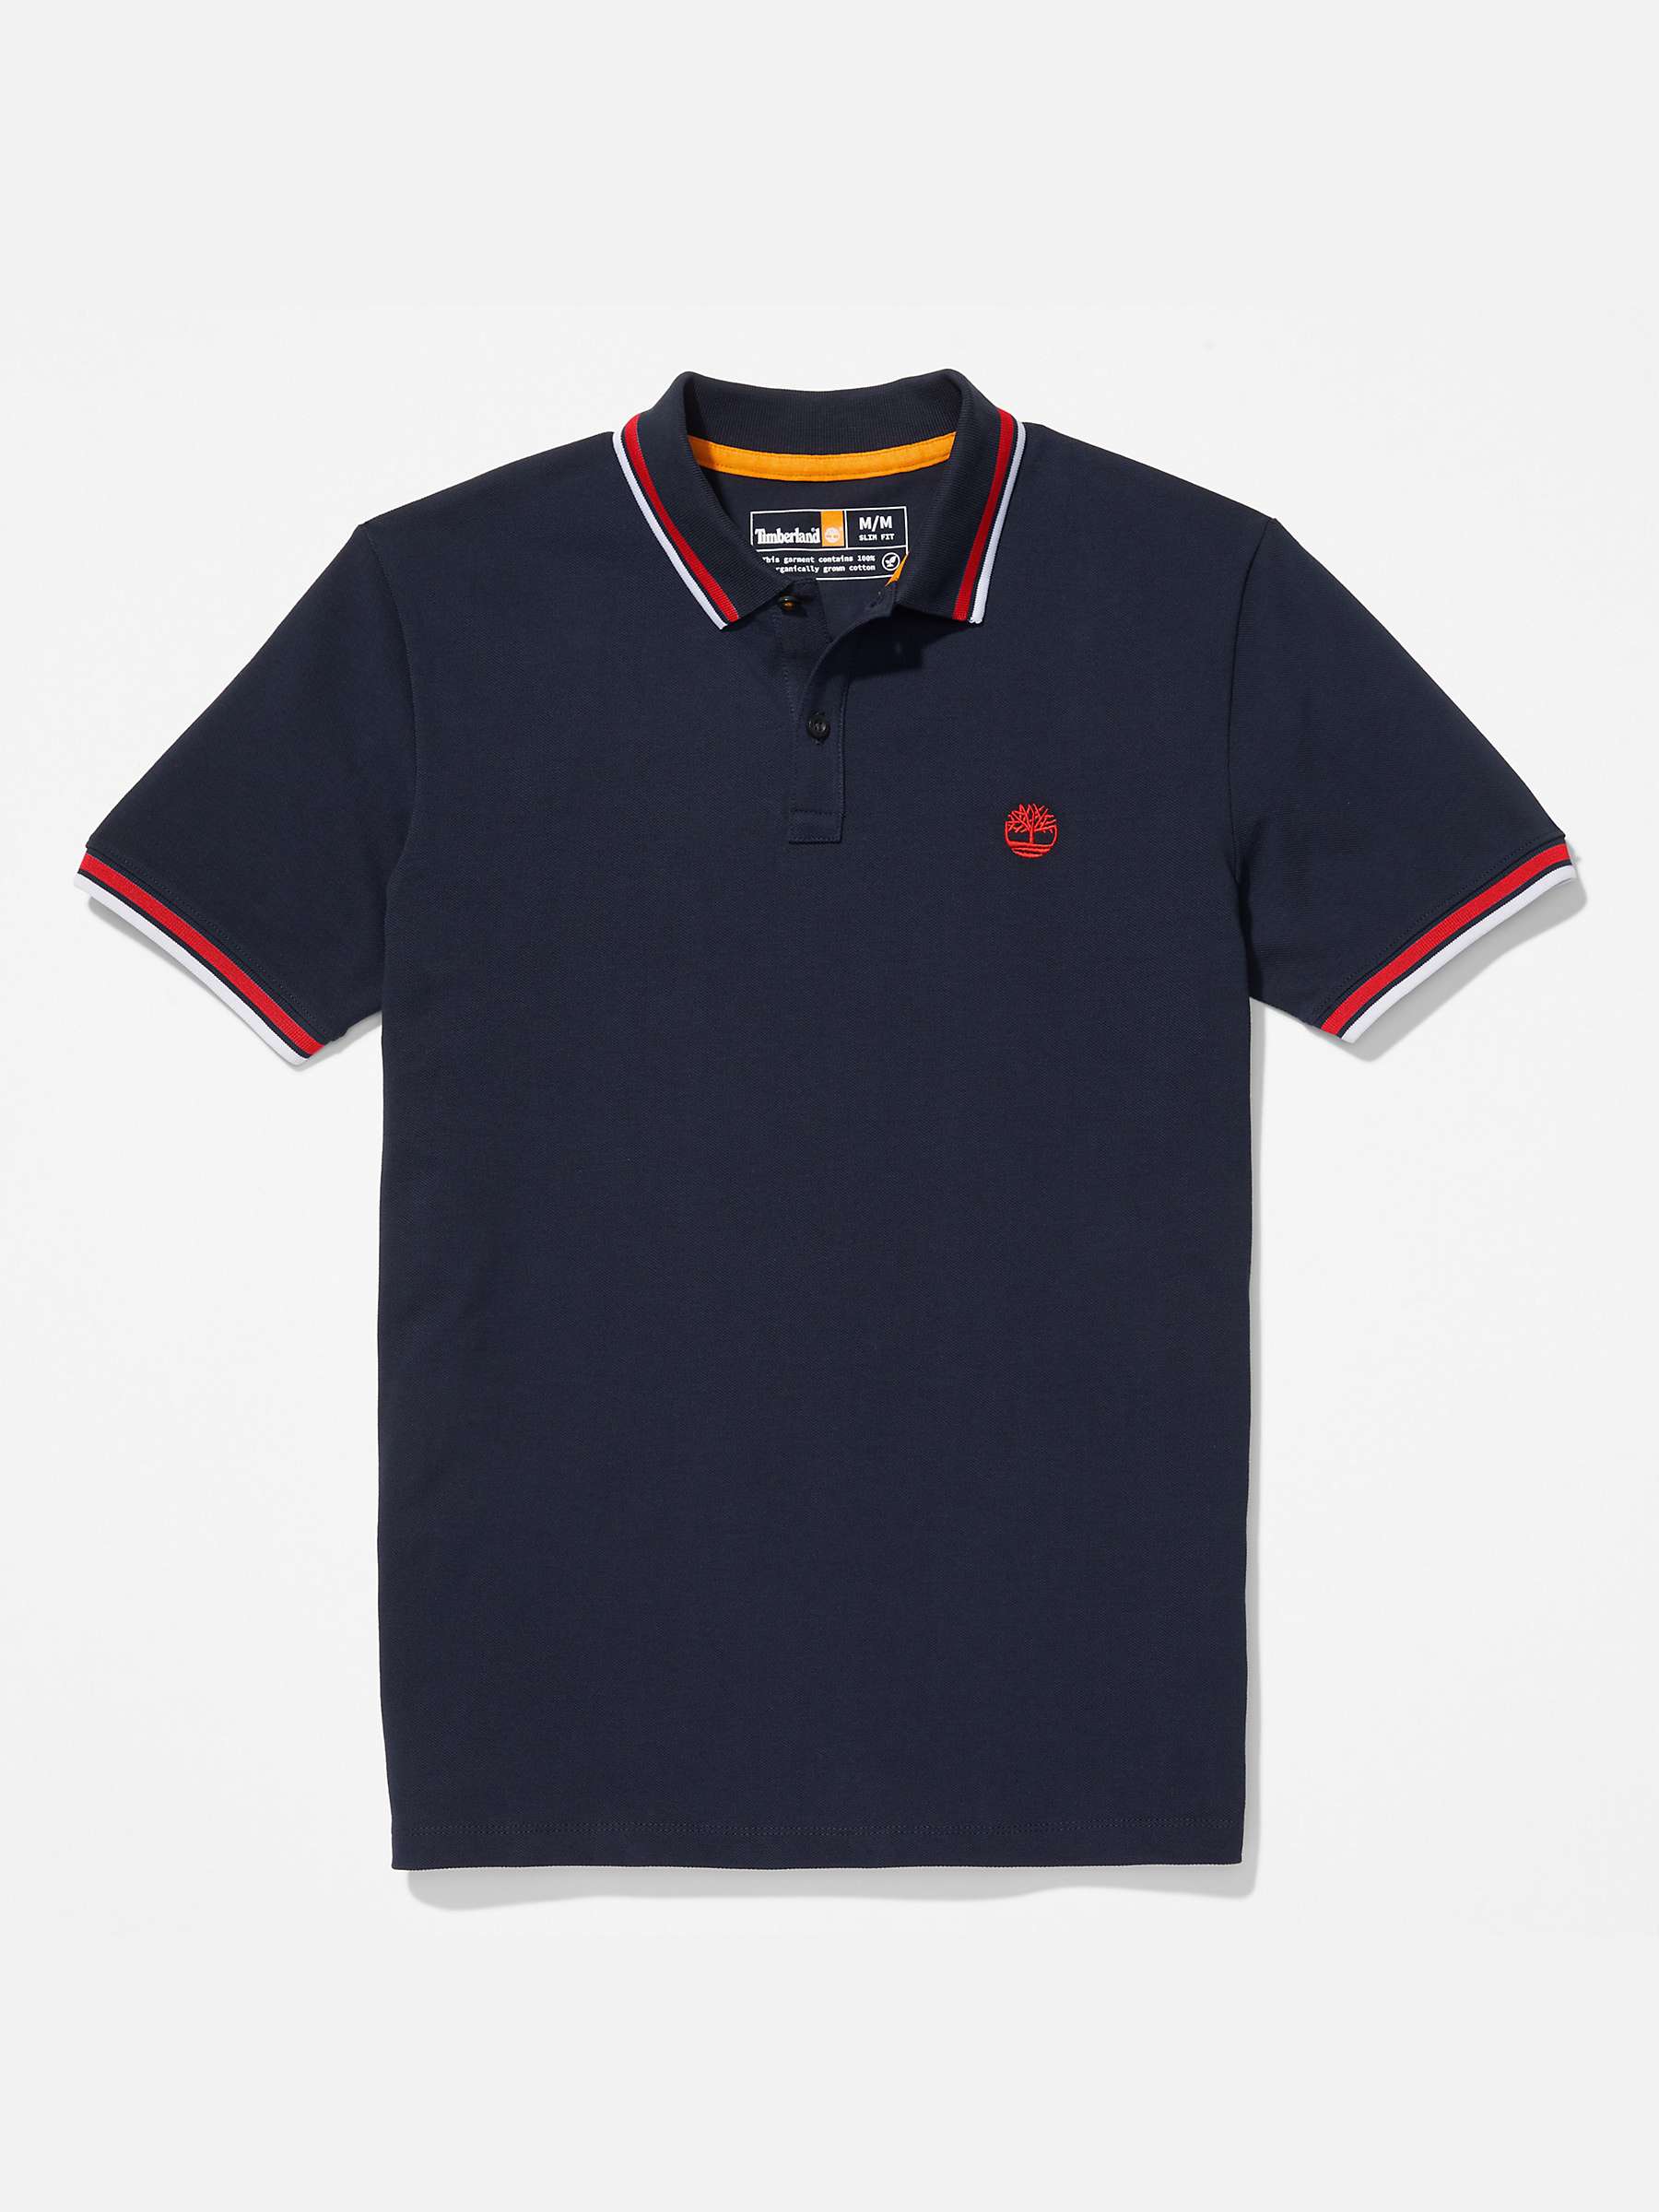 Buy Timberland Short Sleeve Tipped Pique Polo Shirt Online at johnlewis.com